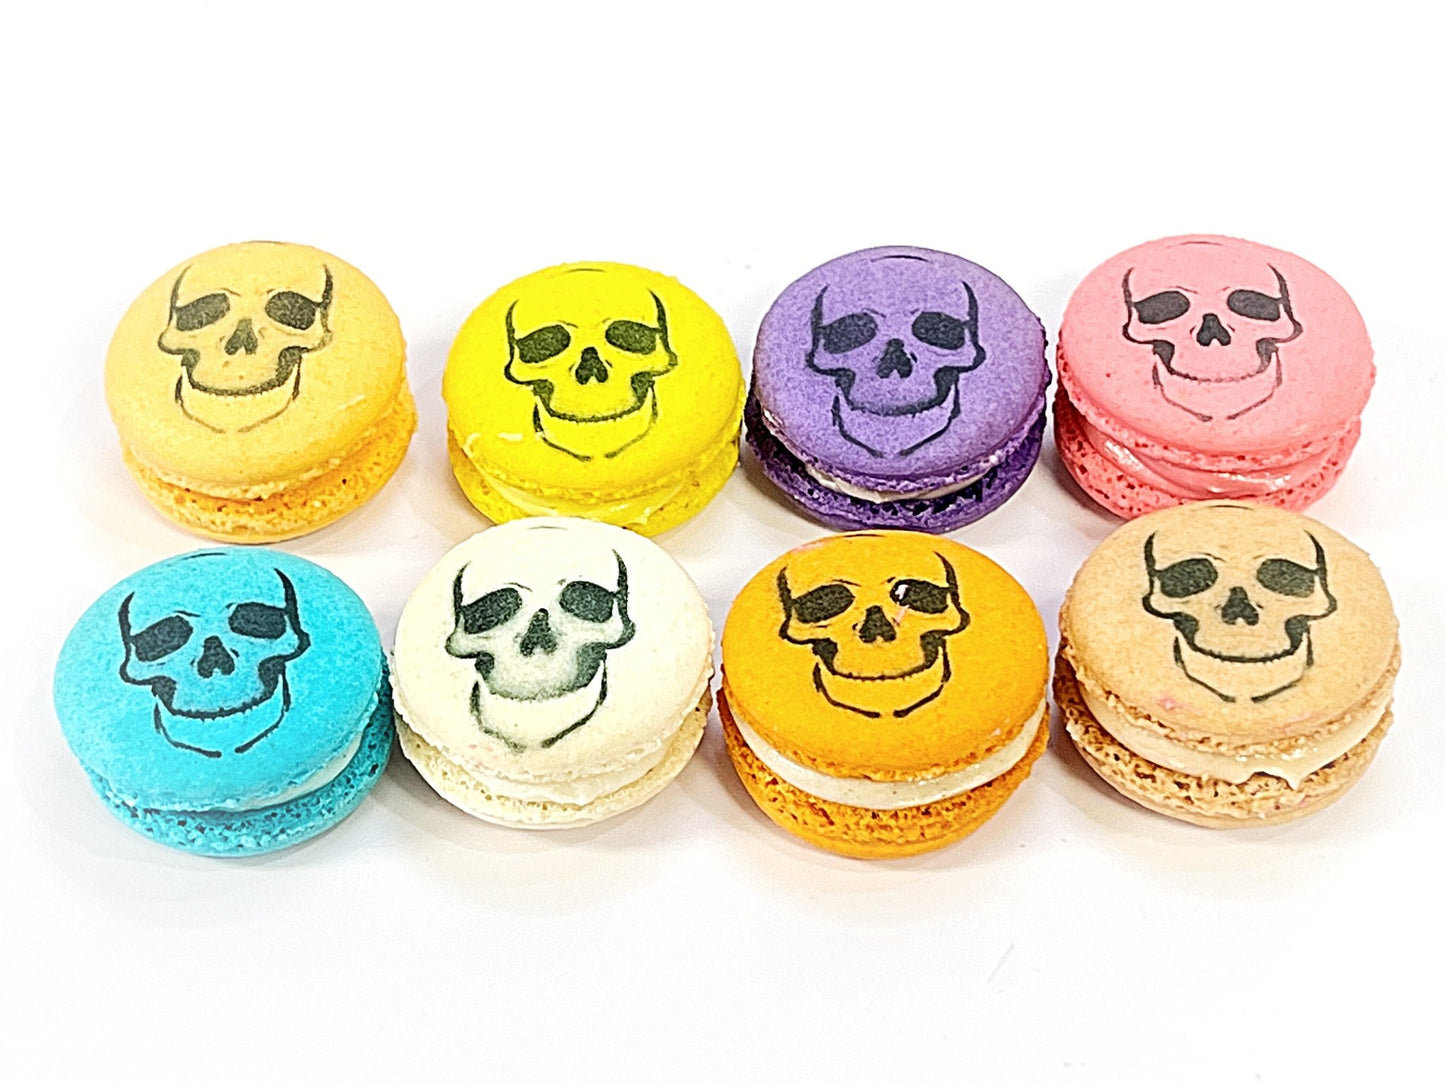 Skull French Macaron | Choose Your Favorite Flavors - Macaron Centrale6 PackRaspberry